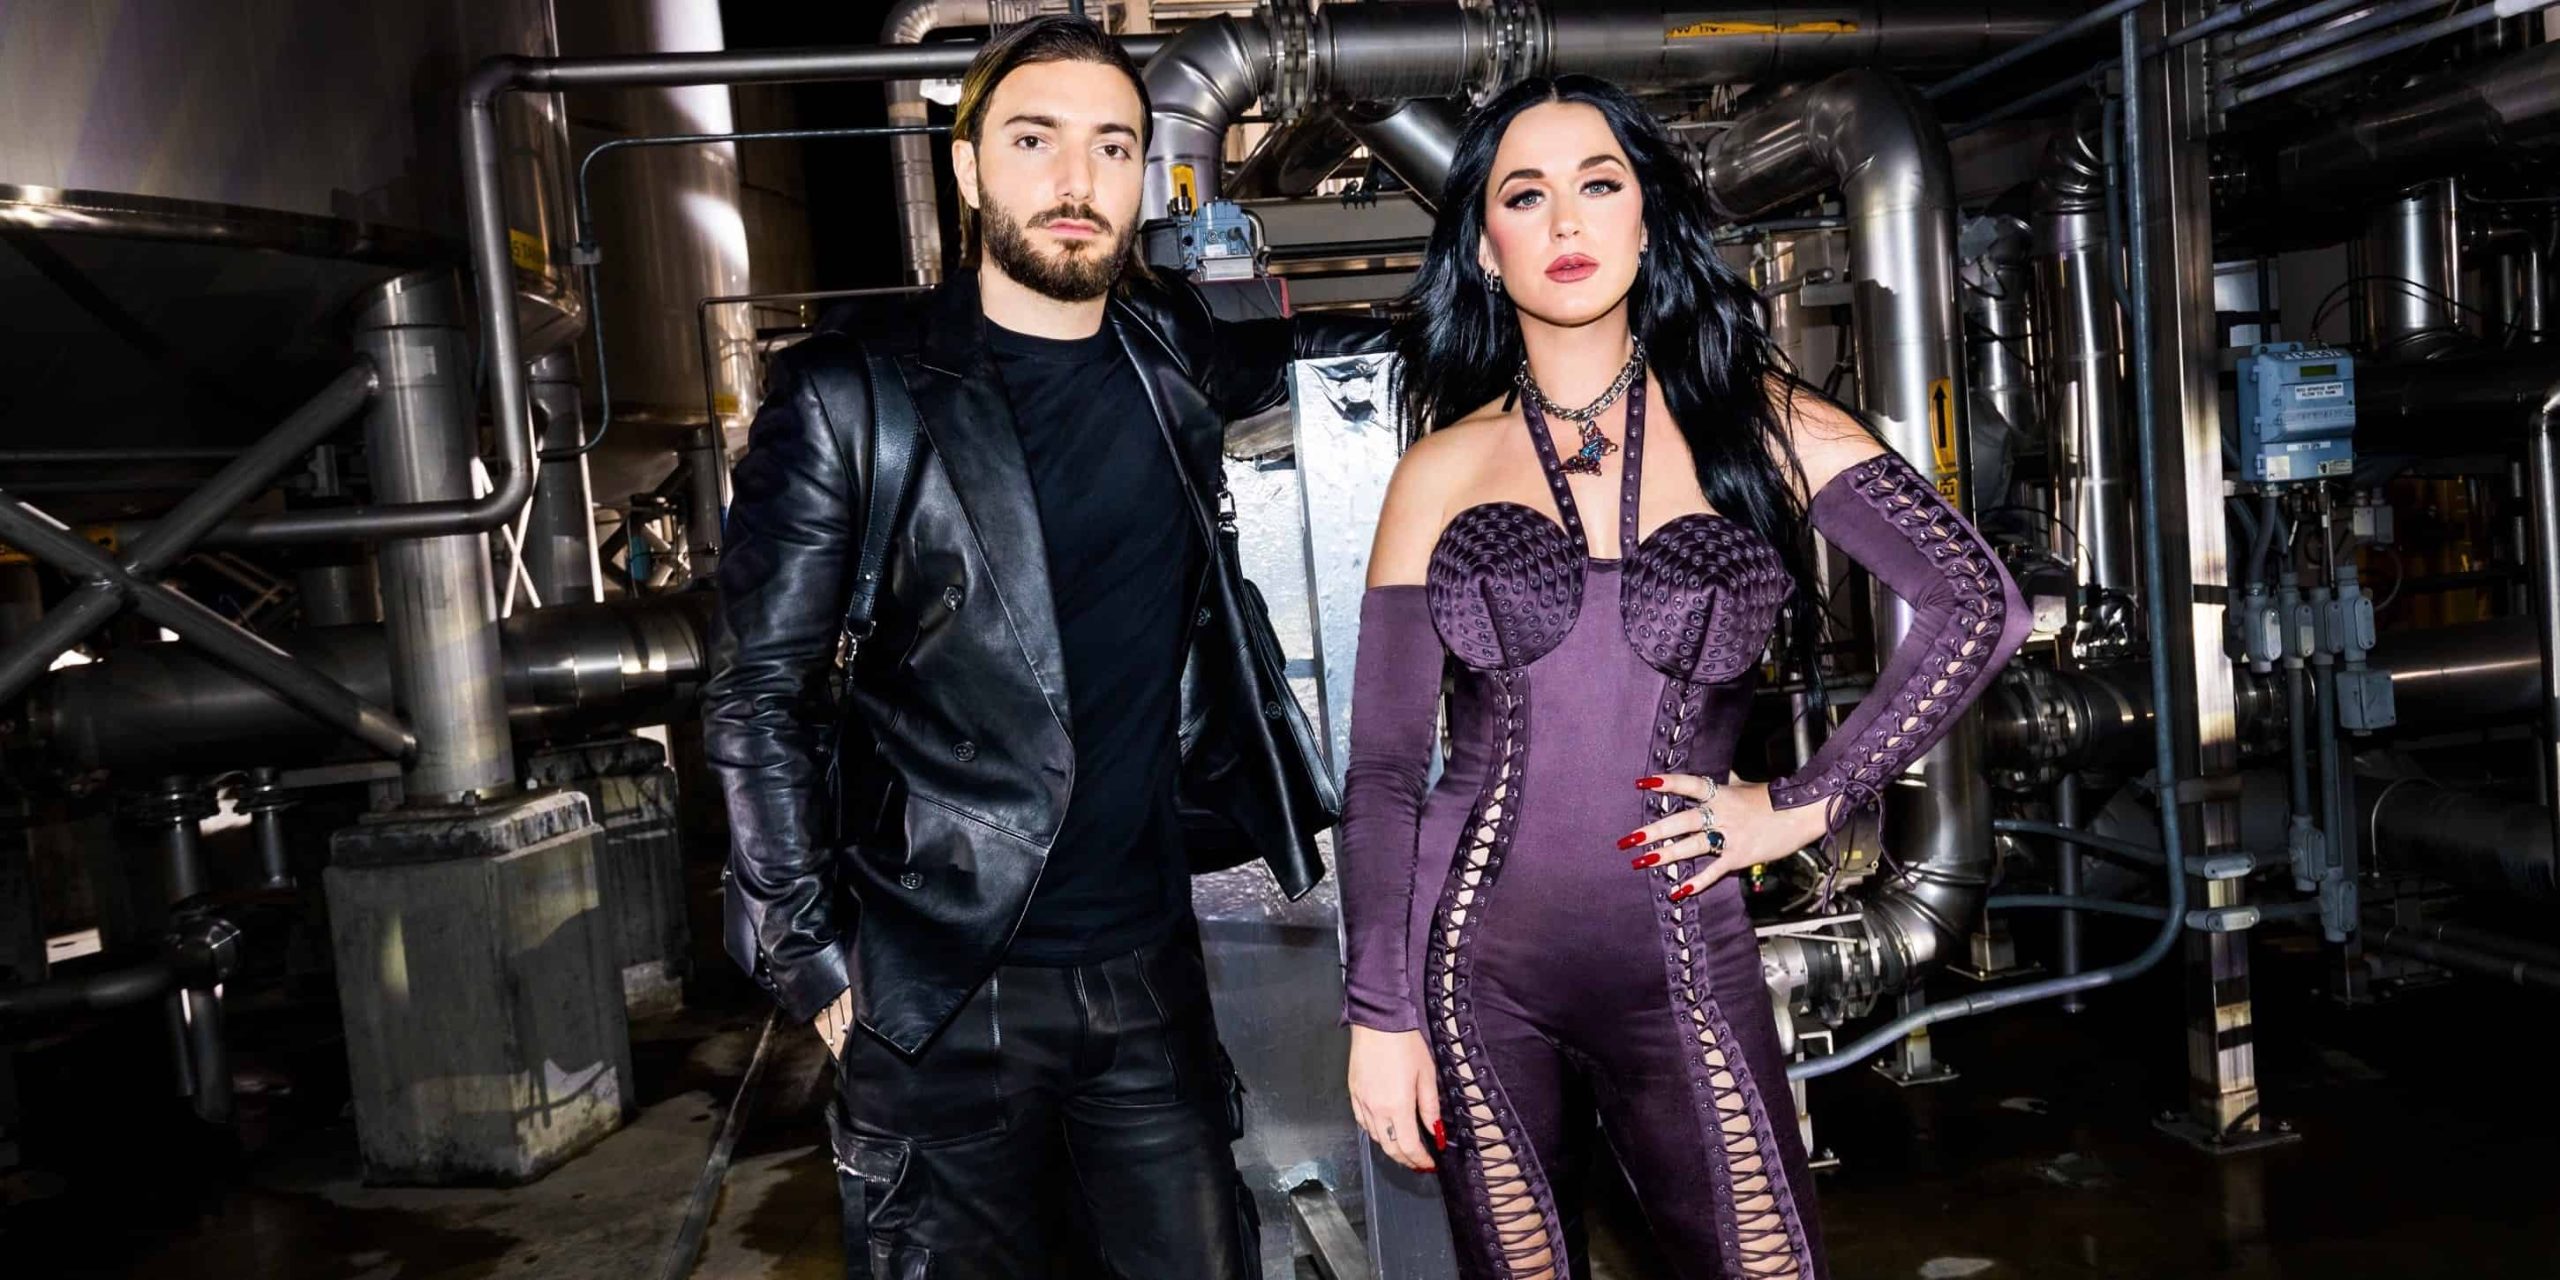 Alesso unveils VIP Mix of Katy Perry collaboration ‘When I'm Gone’: Listen